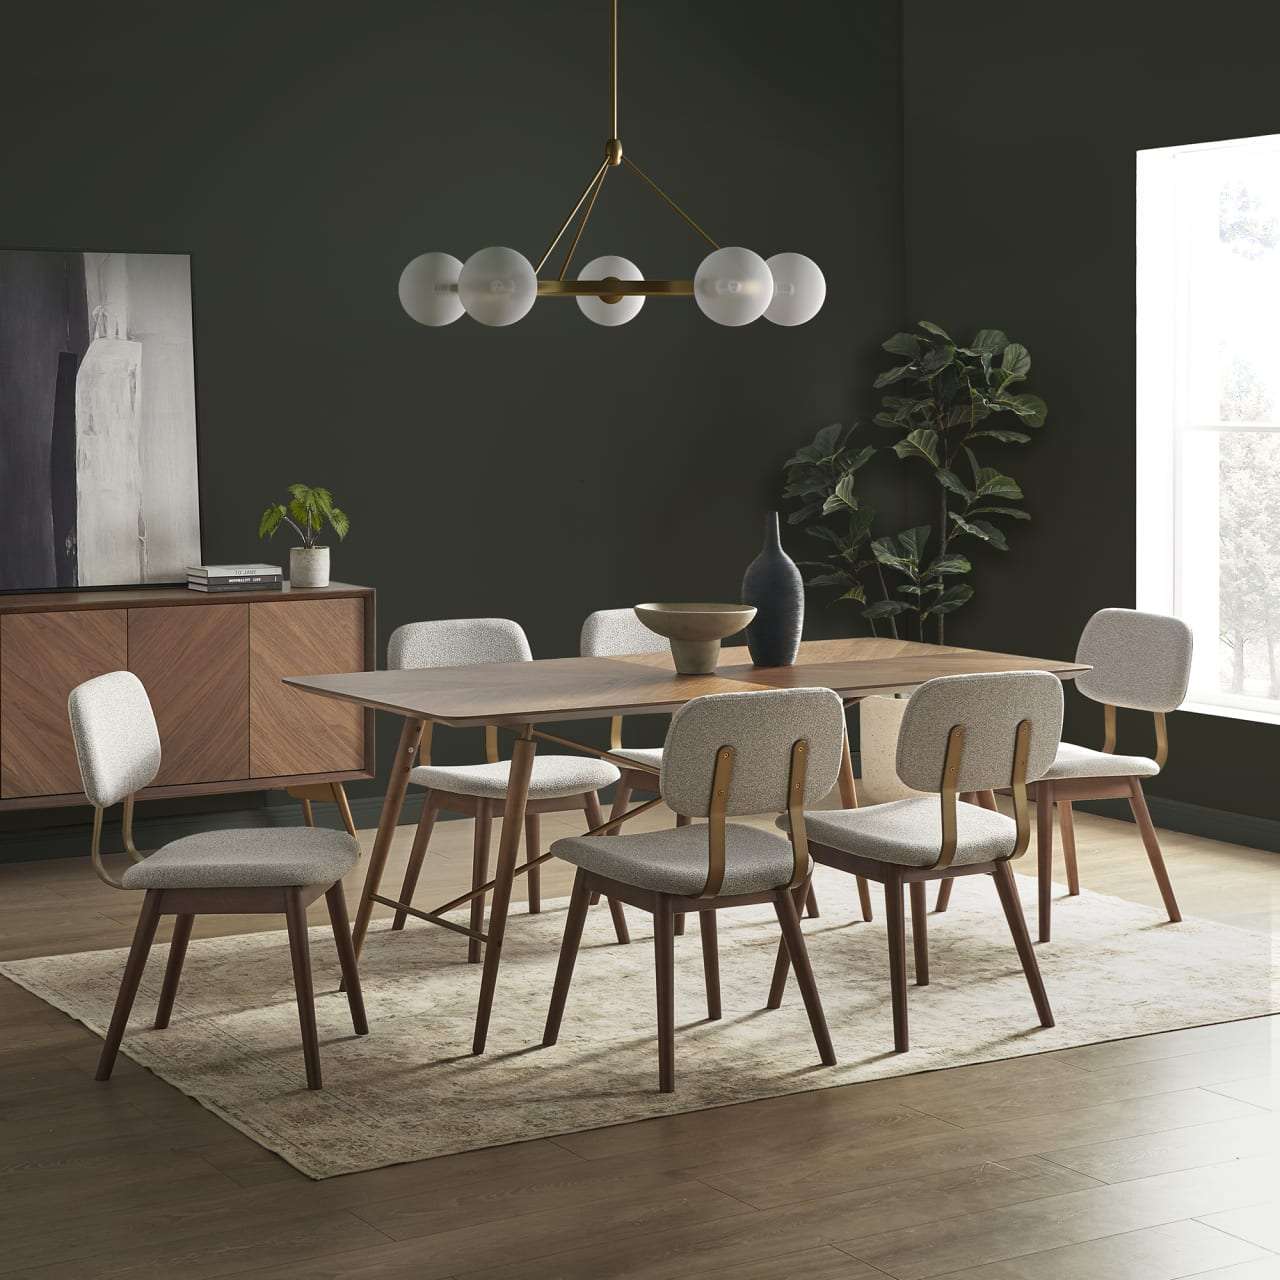 Theo Round Dining Table